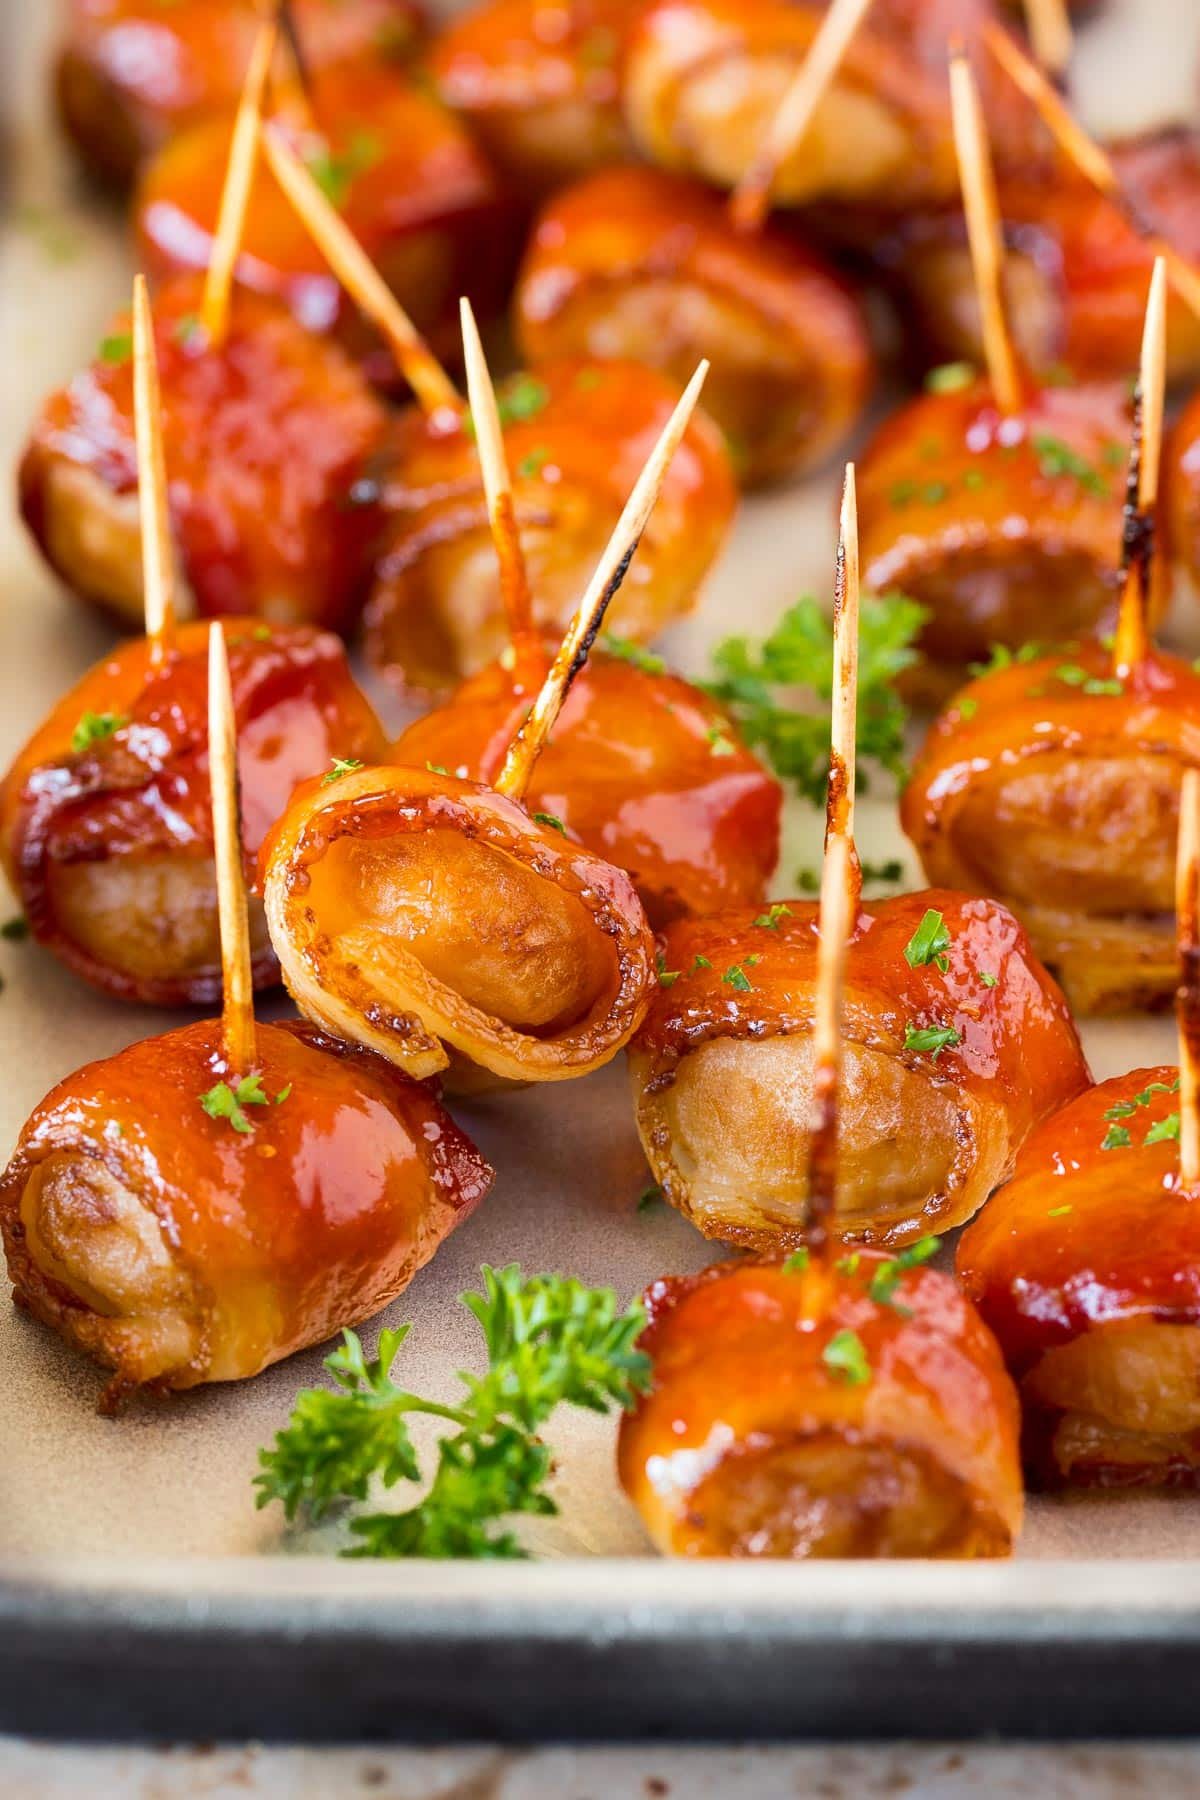 Bacon wrapped water chestnuts on a sheet pan, garnished with parsley.